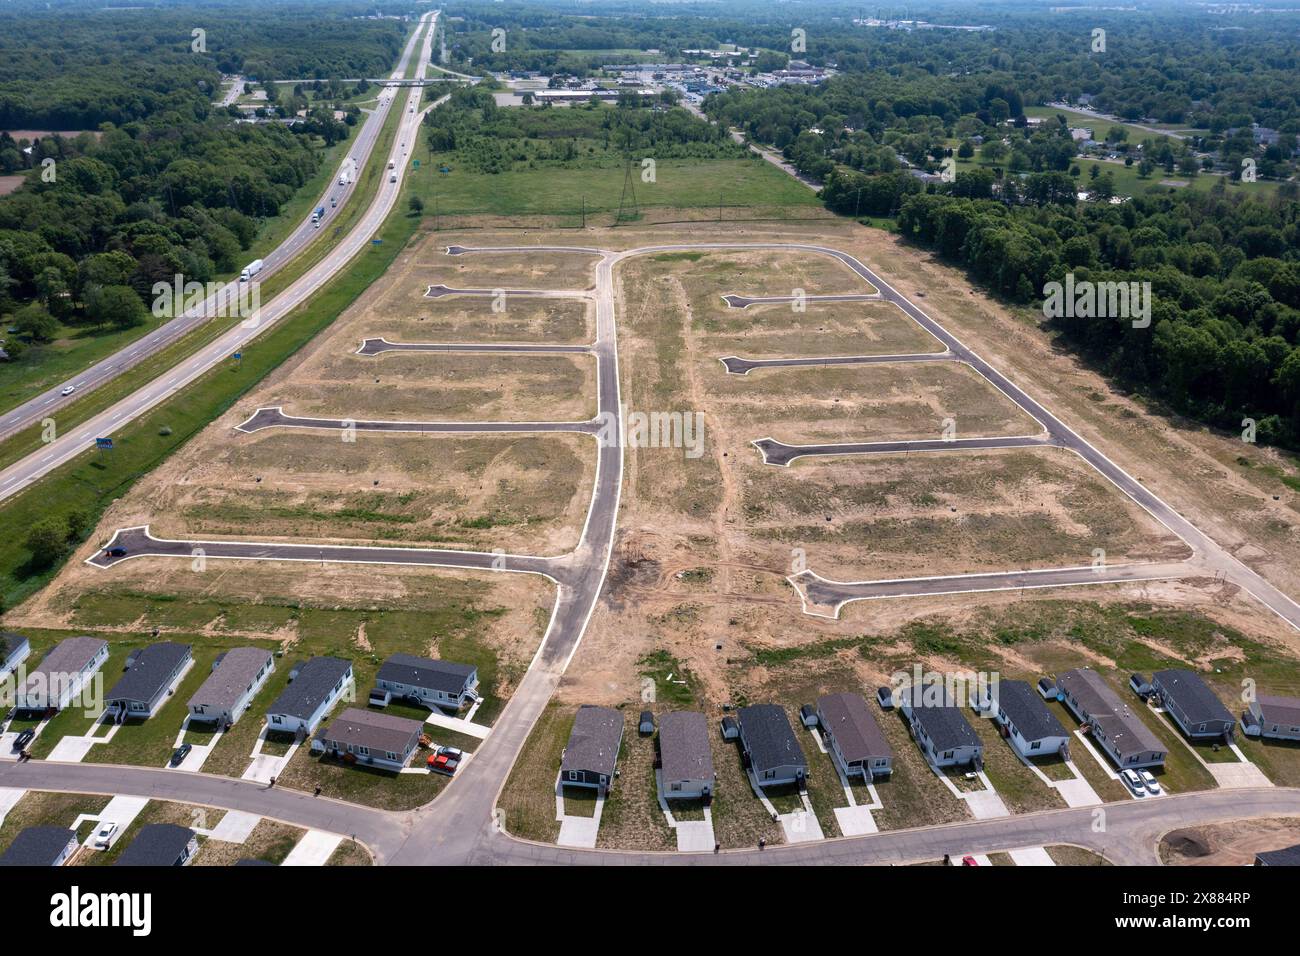 Albion, Michigan - An aerial view of part of the Wildflower Crossing mobile home park, with streets laid out for expansion. The development is adjacen Stock Photo